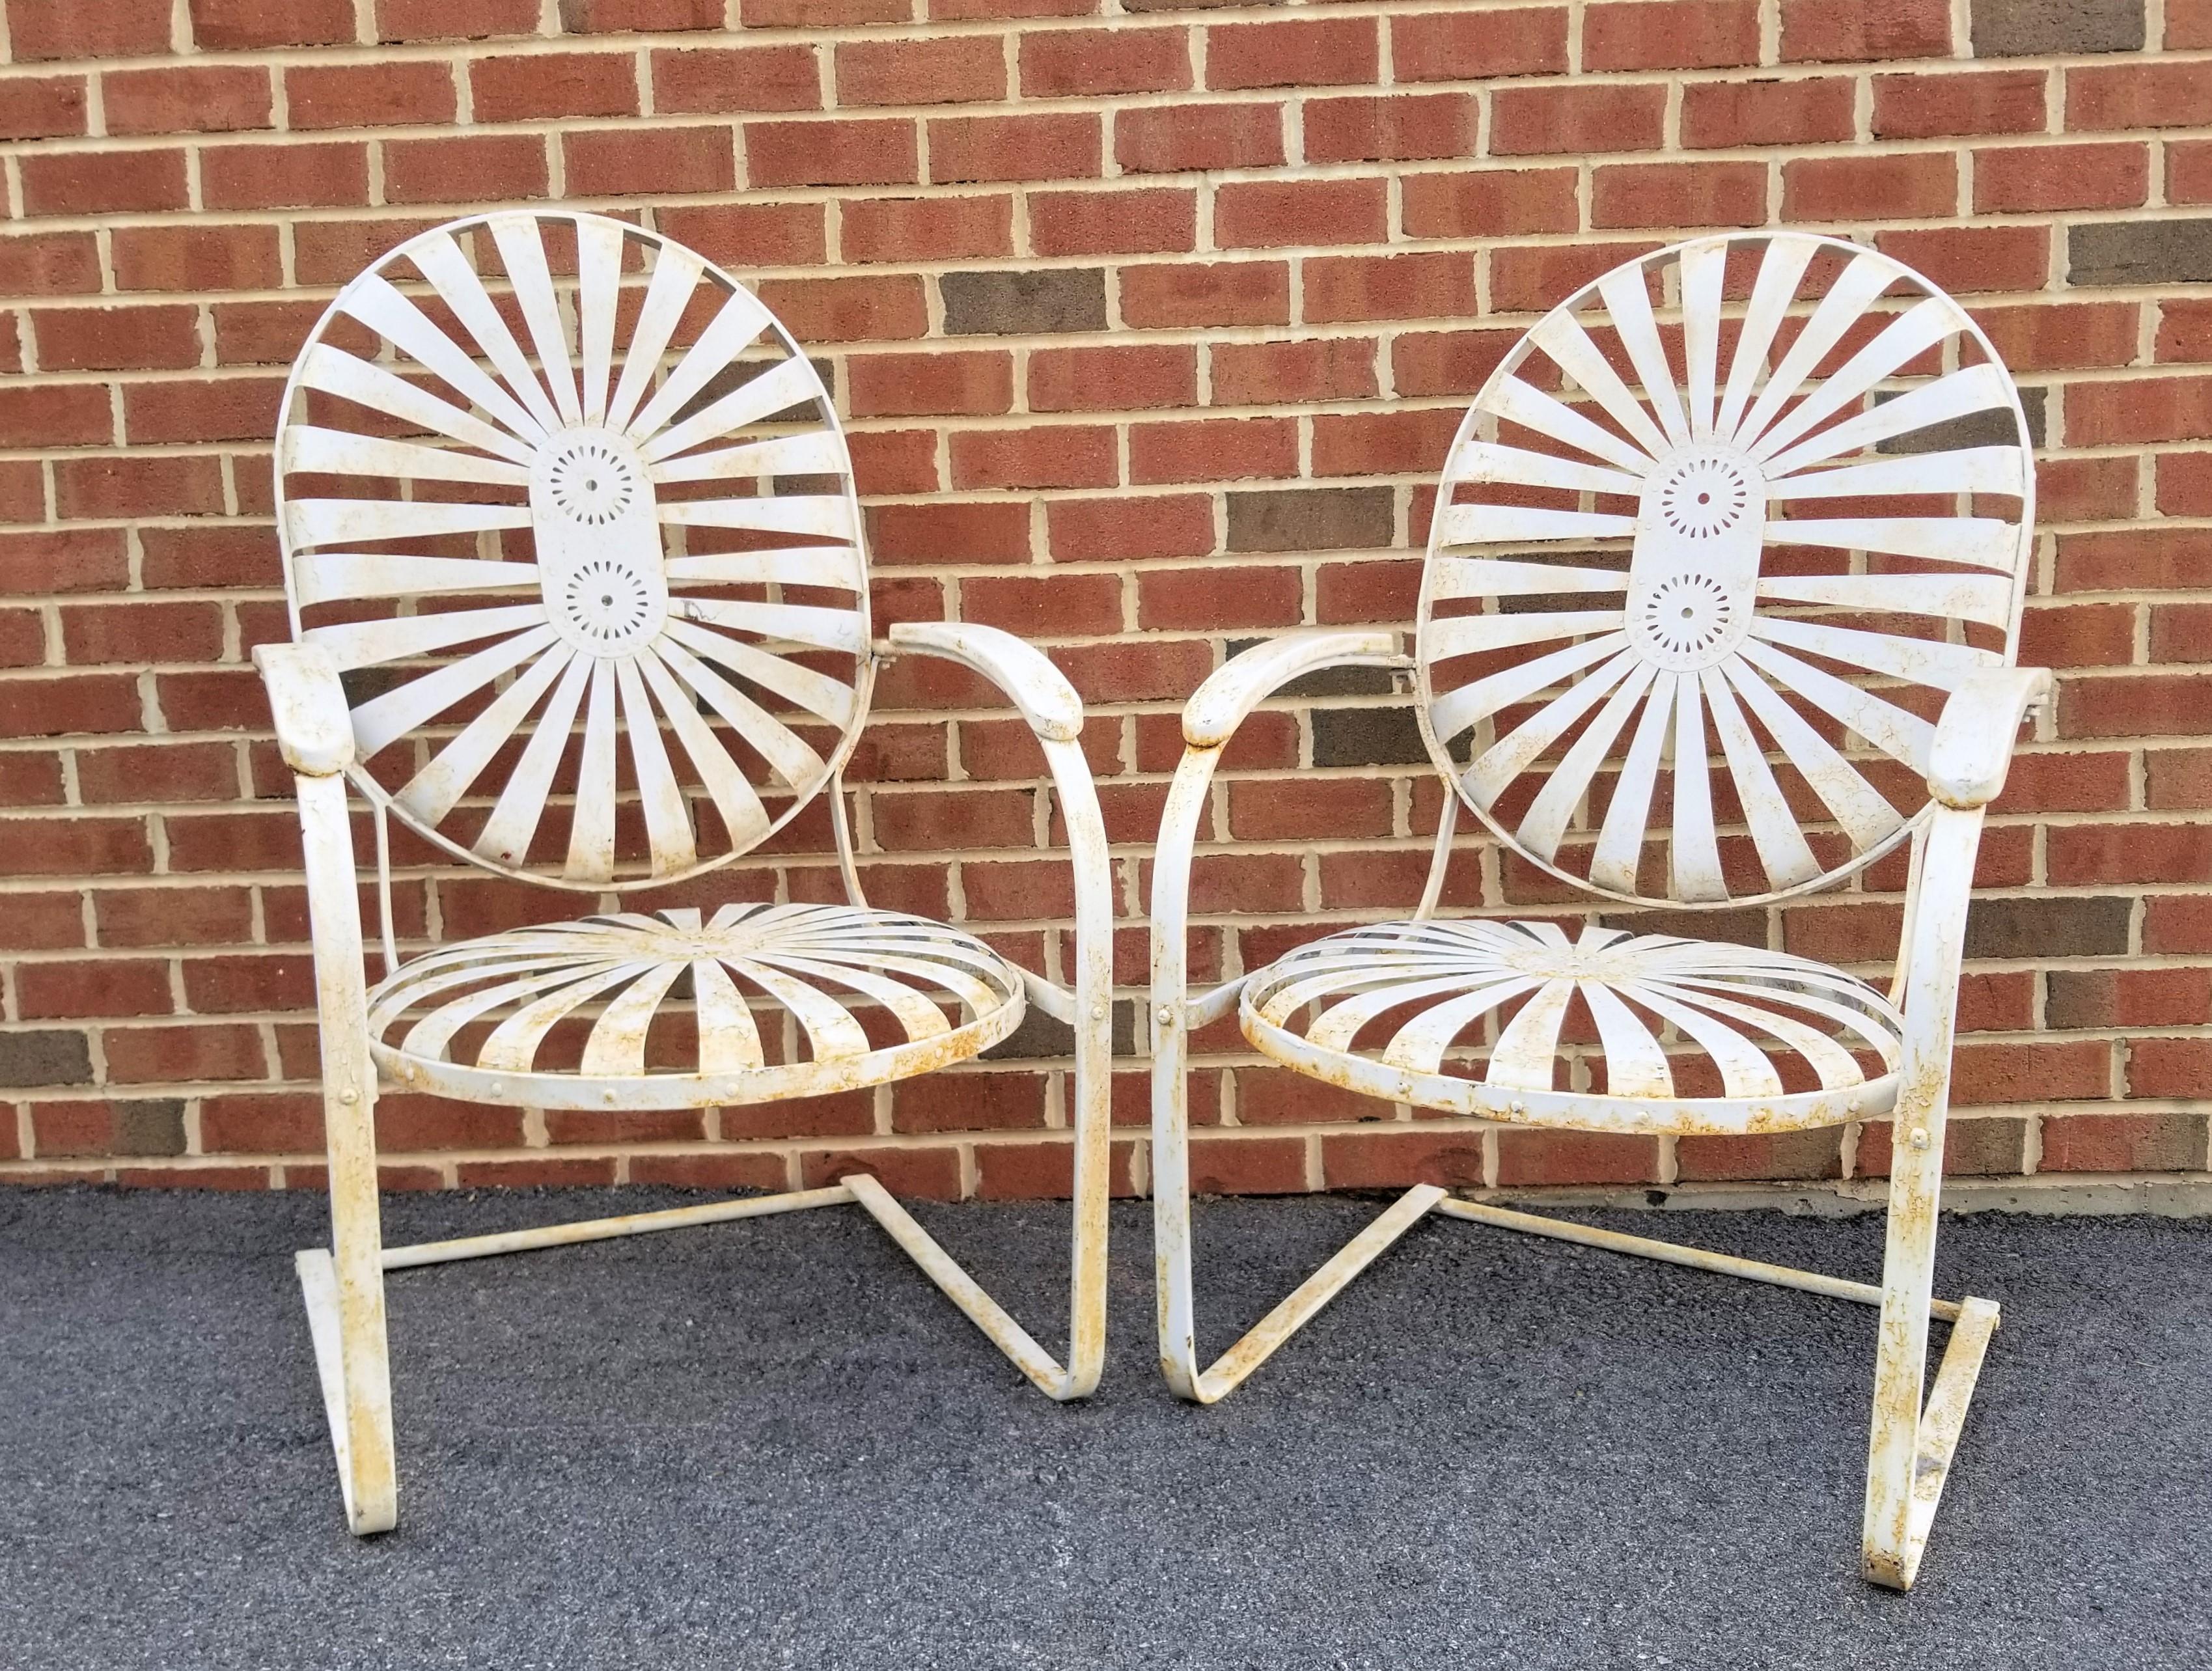 Pair of 1930s French Art Deco Garden Chairs by Francois Carre. This pair is the large version. All parts are intact. Unrestored condition with wear consistent with age. 